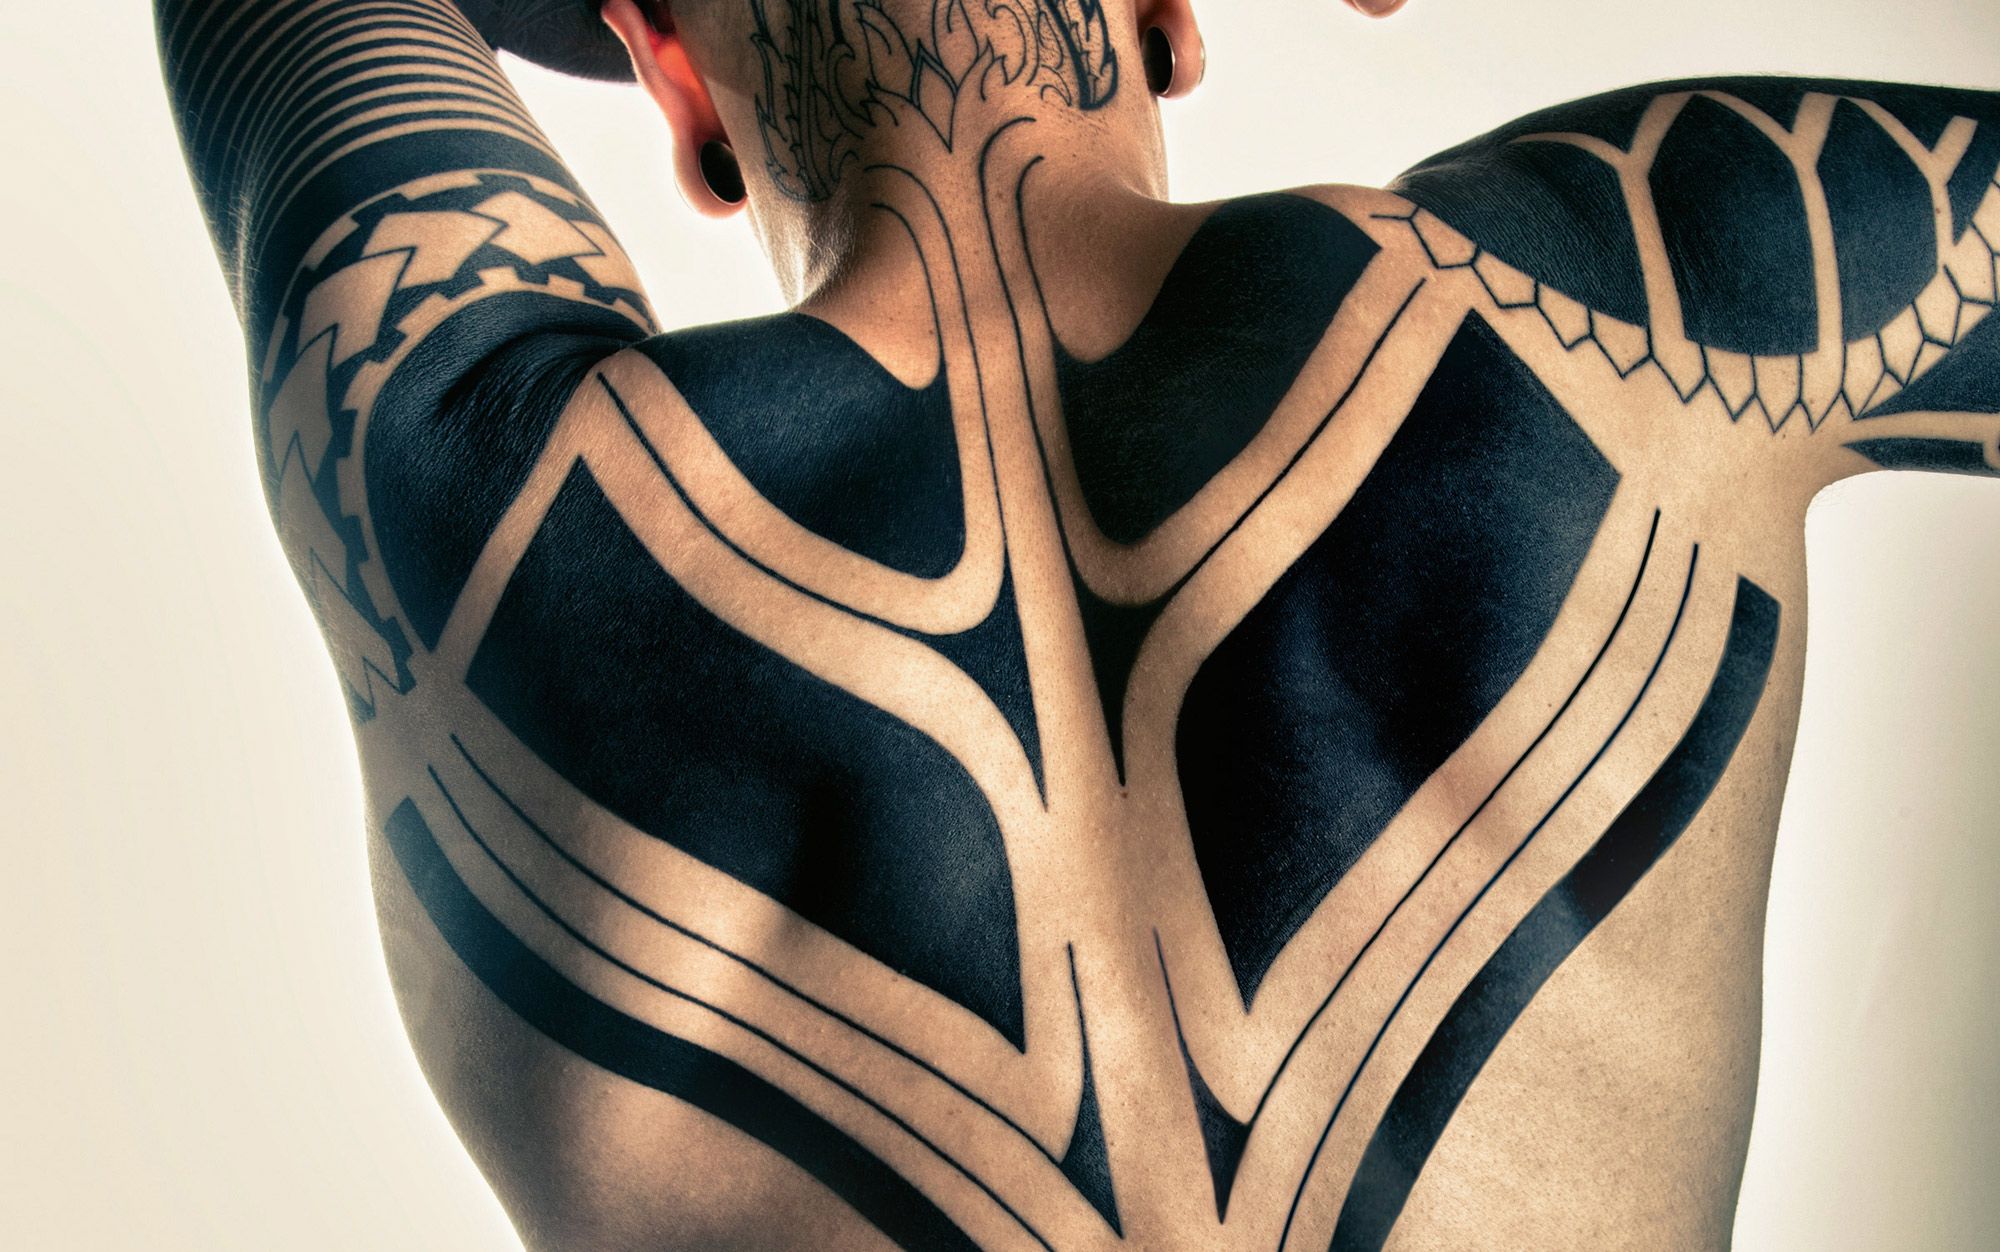 Tattoos and Physical Therapy A View on Body Art in the Healthcare Setting   Regis University  School of Physical Therapy